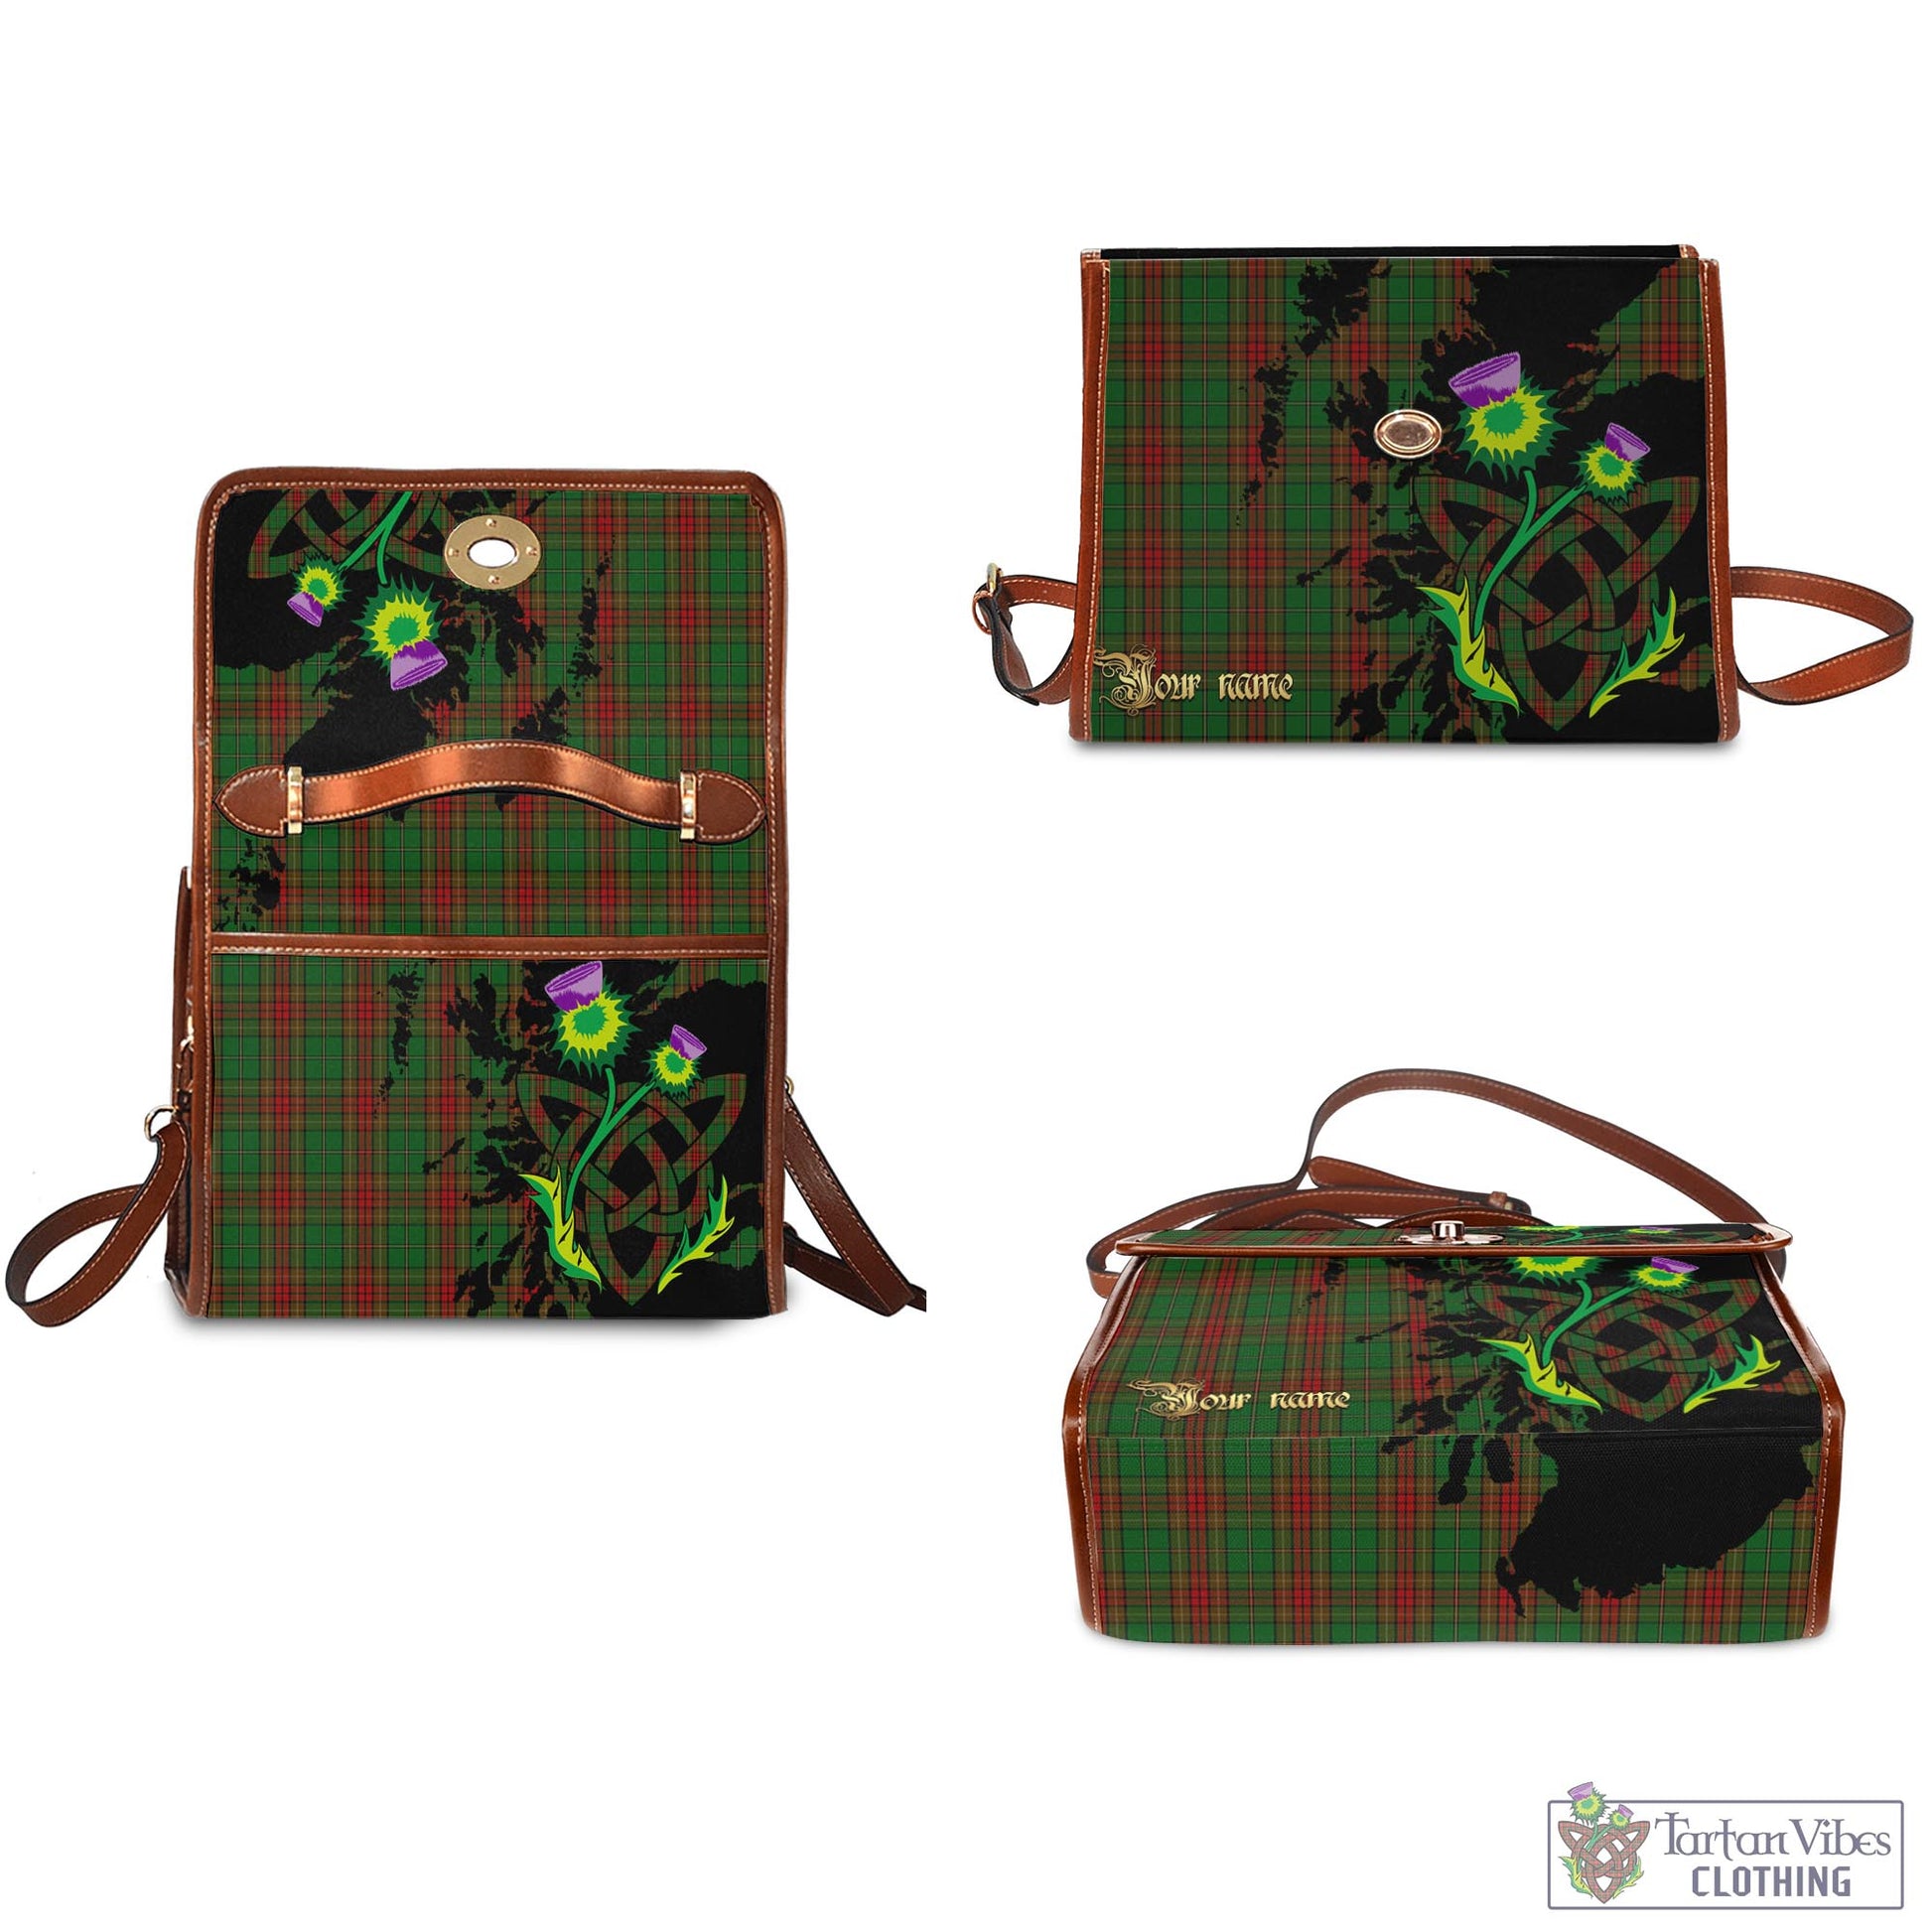 Tartan Vibes Clothing Cavan County Ireland Tartan Waterproof Canvas Bag with Scotland Map and Thistle Celtic Accents